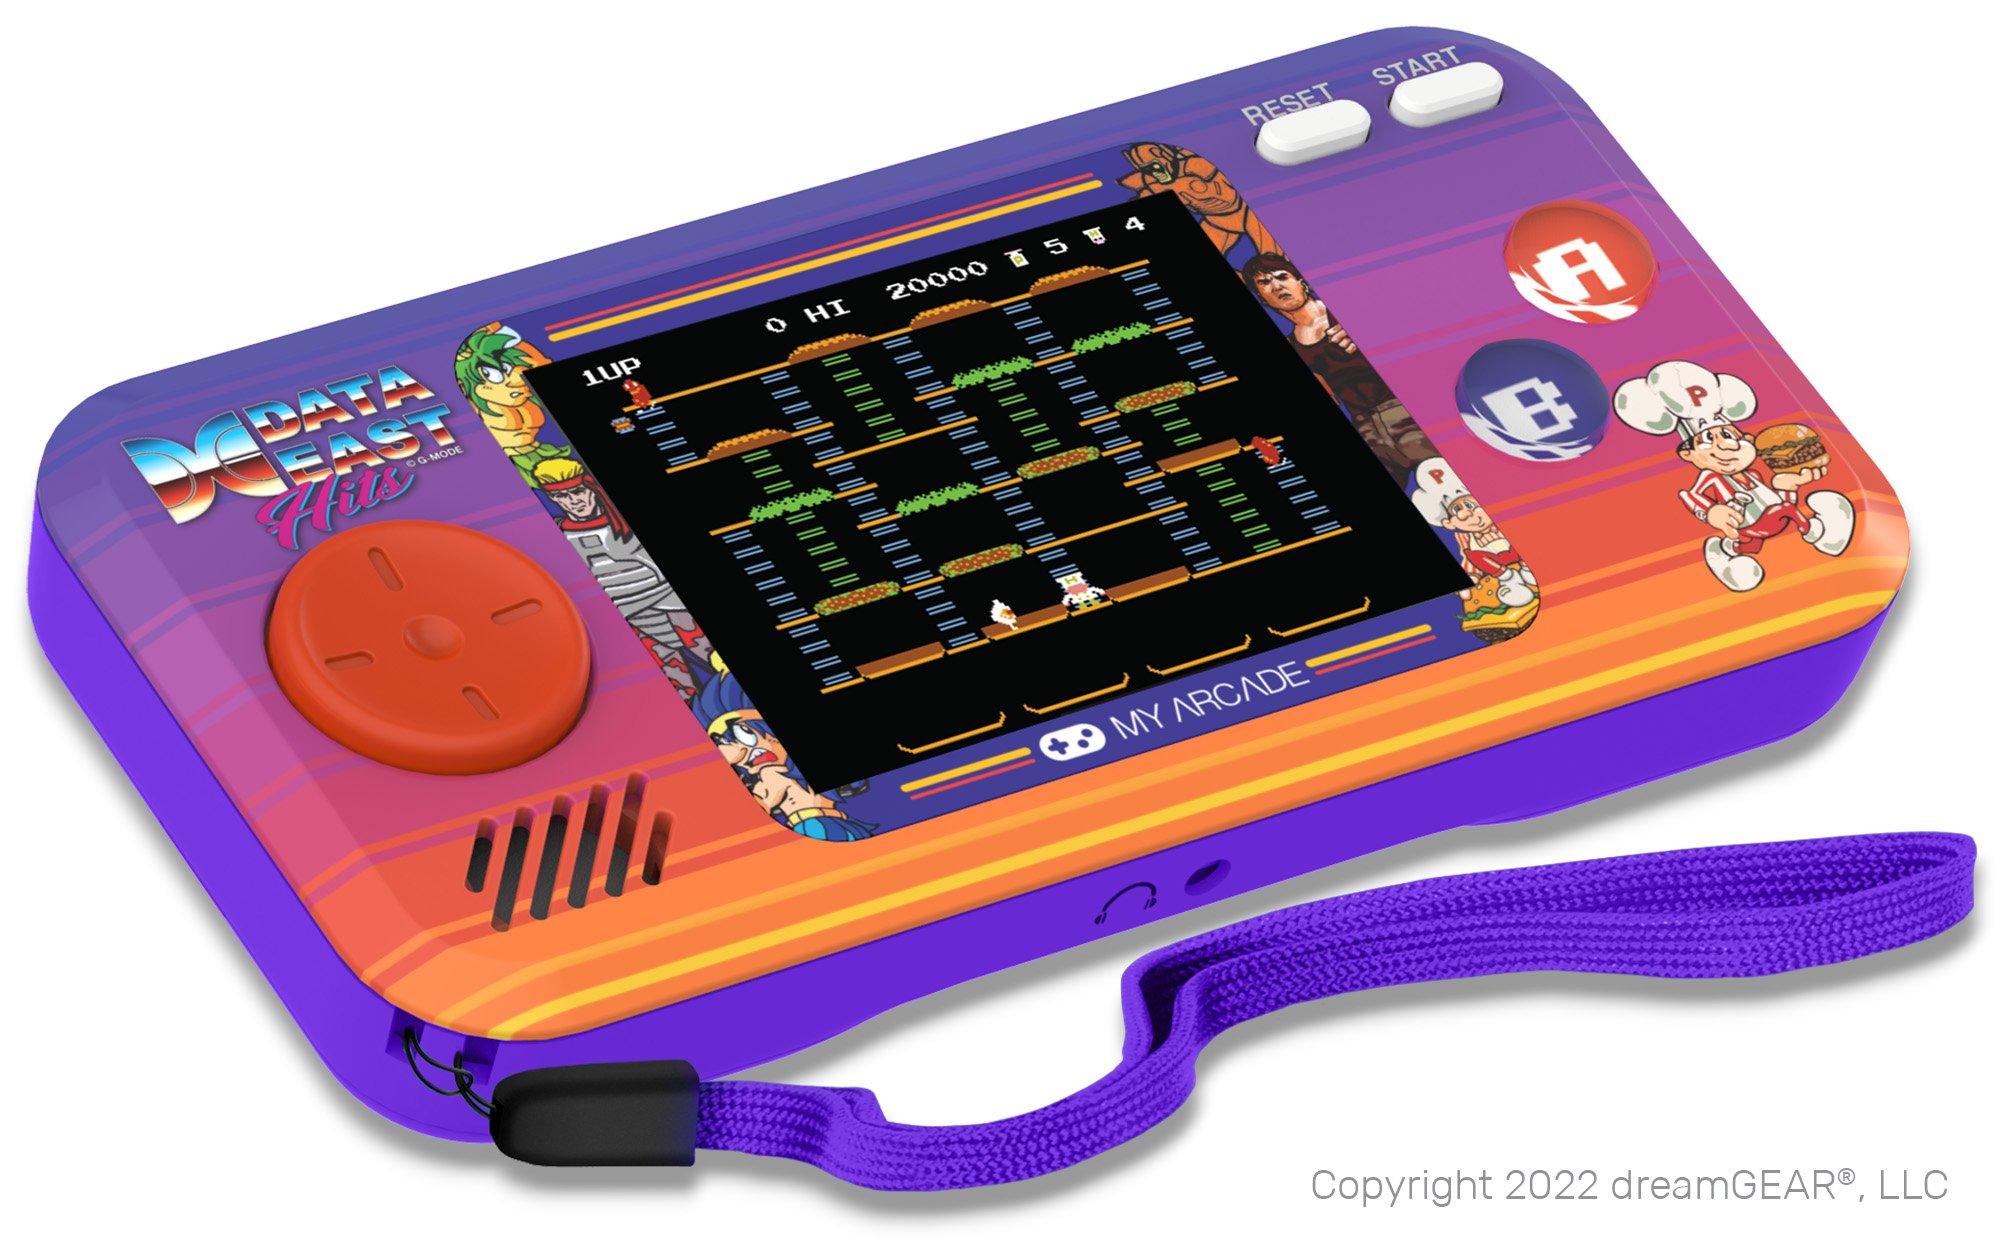 Data East Hits Pocket Player Portable Gaming System (308 Games In 1)